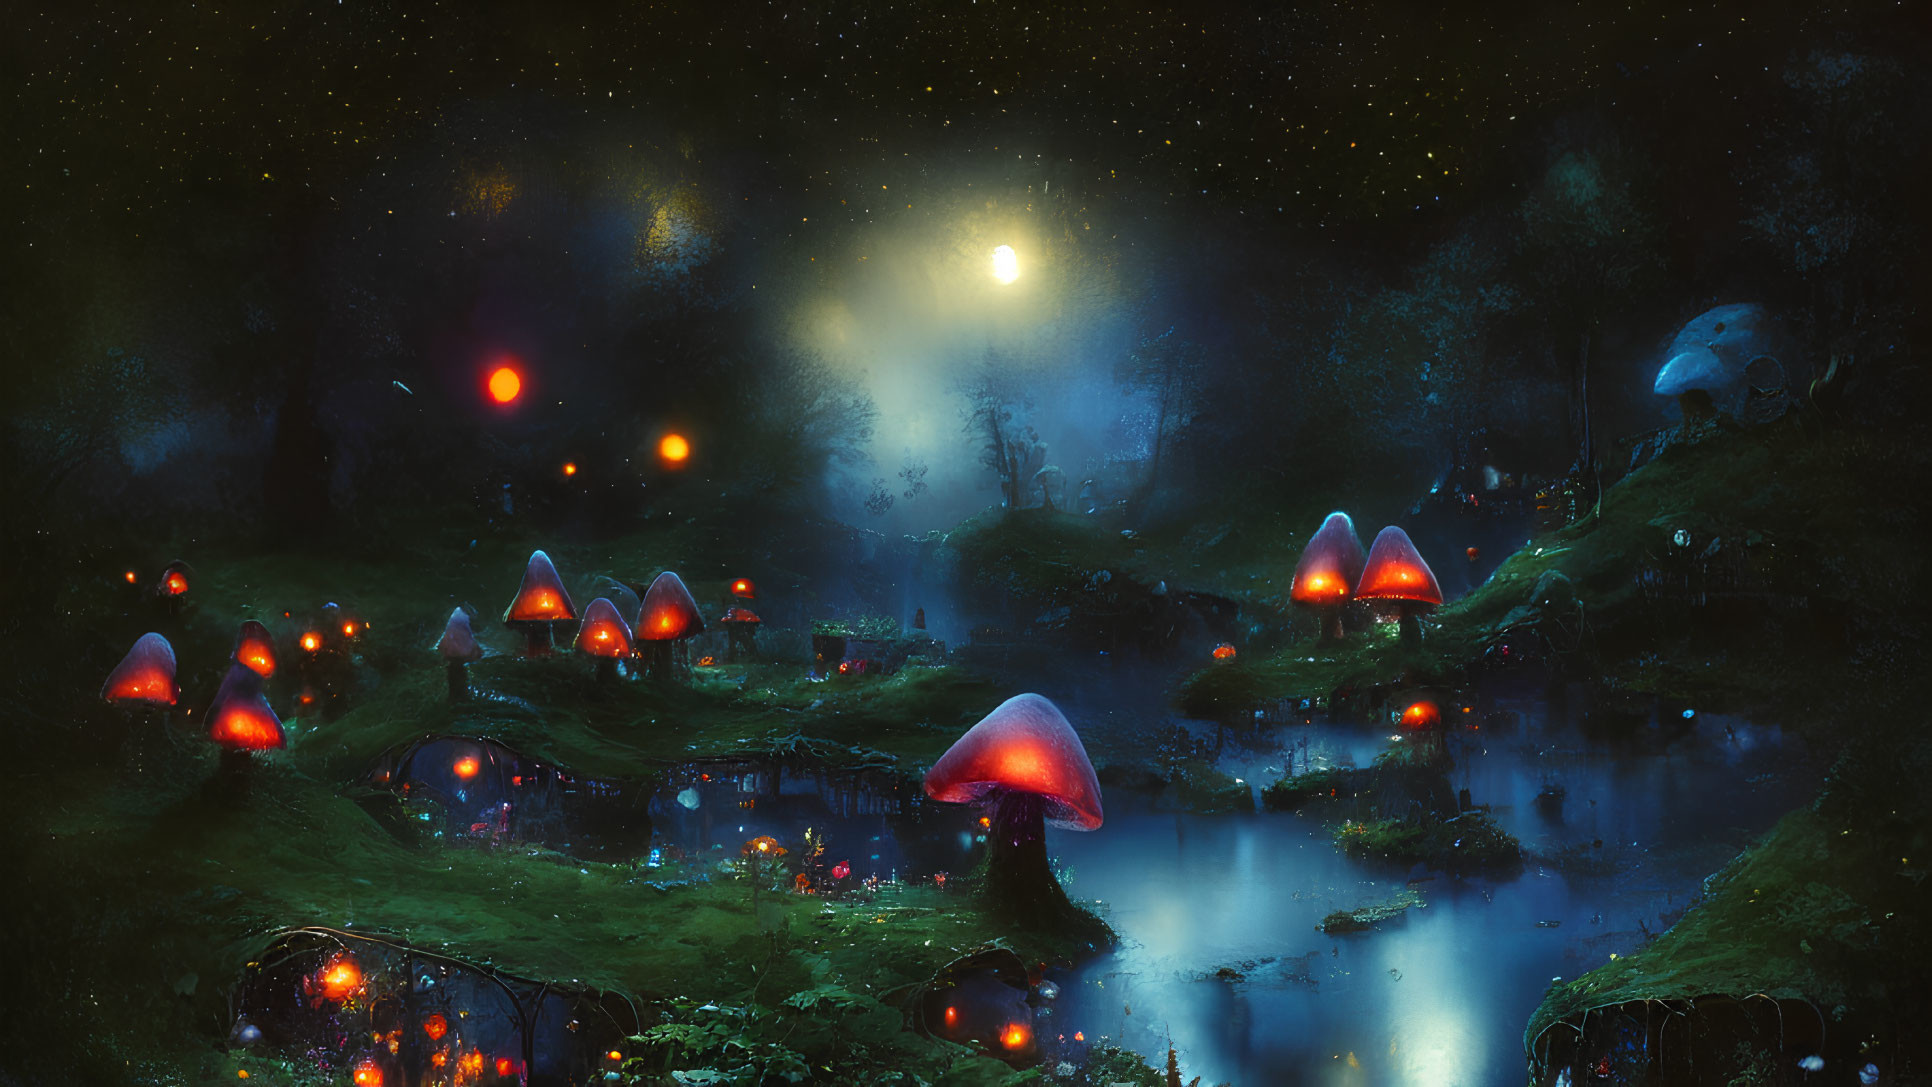 Enchanting night landscape with oversized mushrooms and glowing orbs